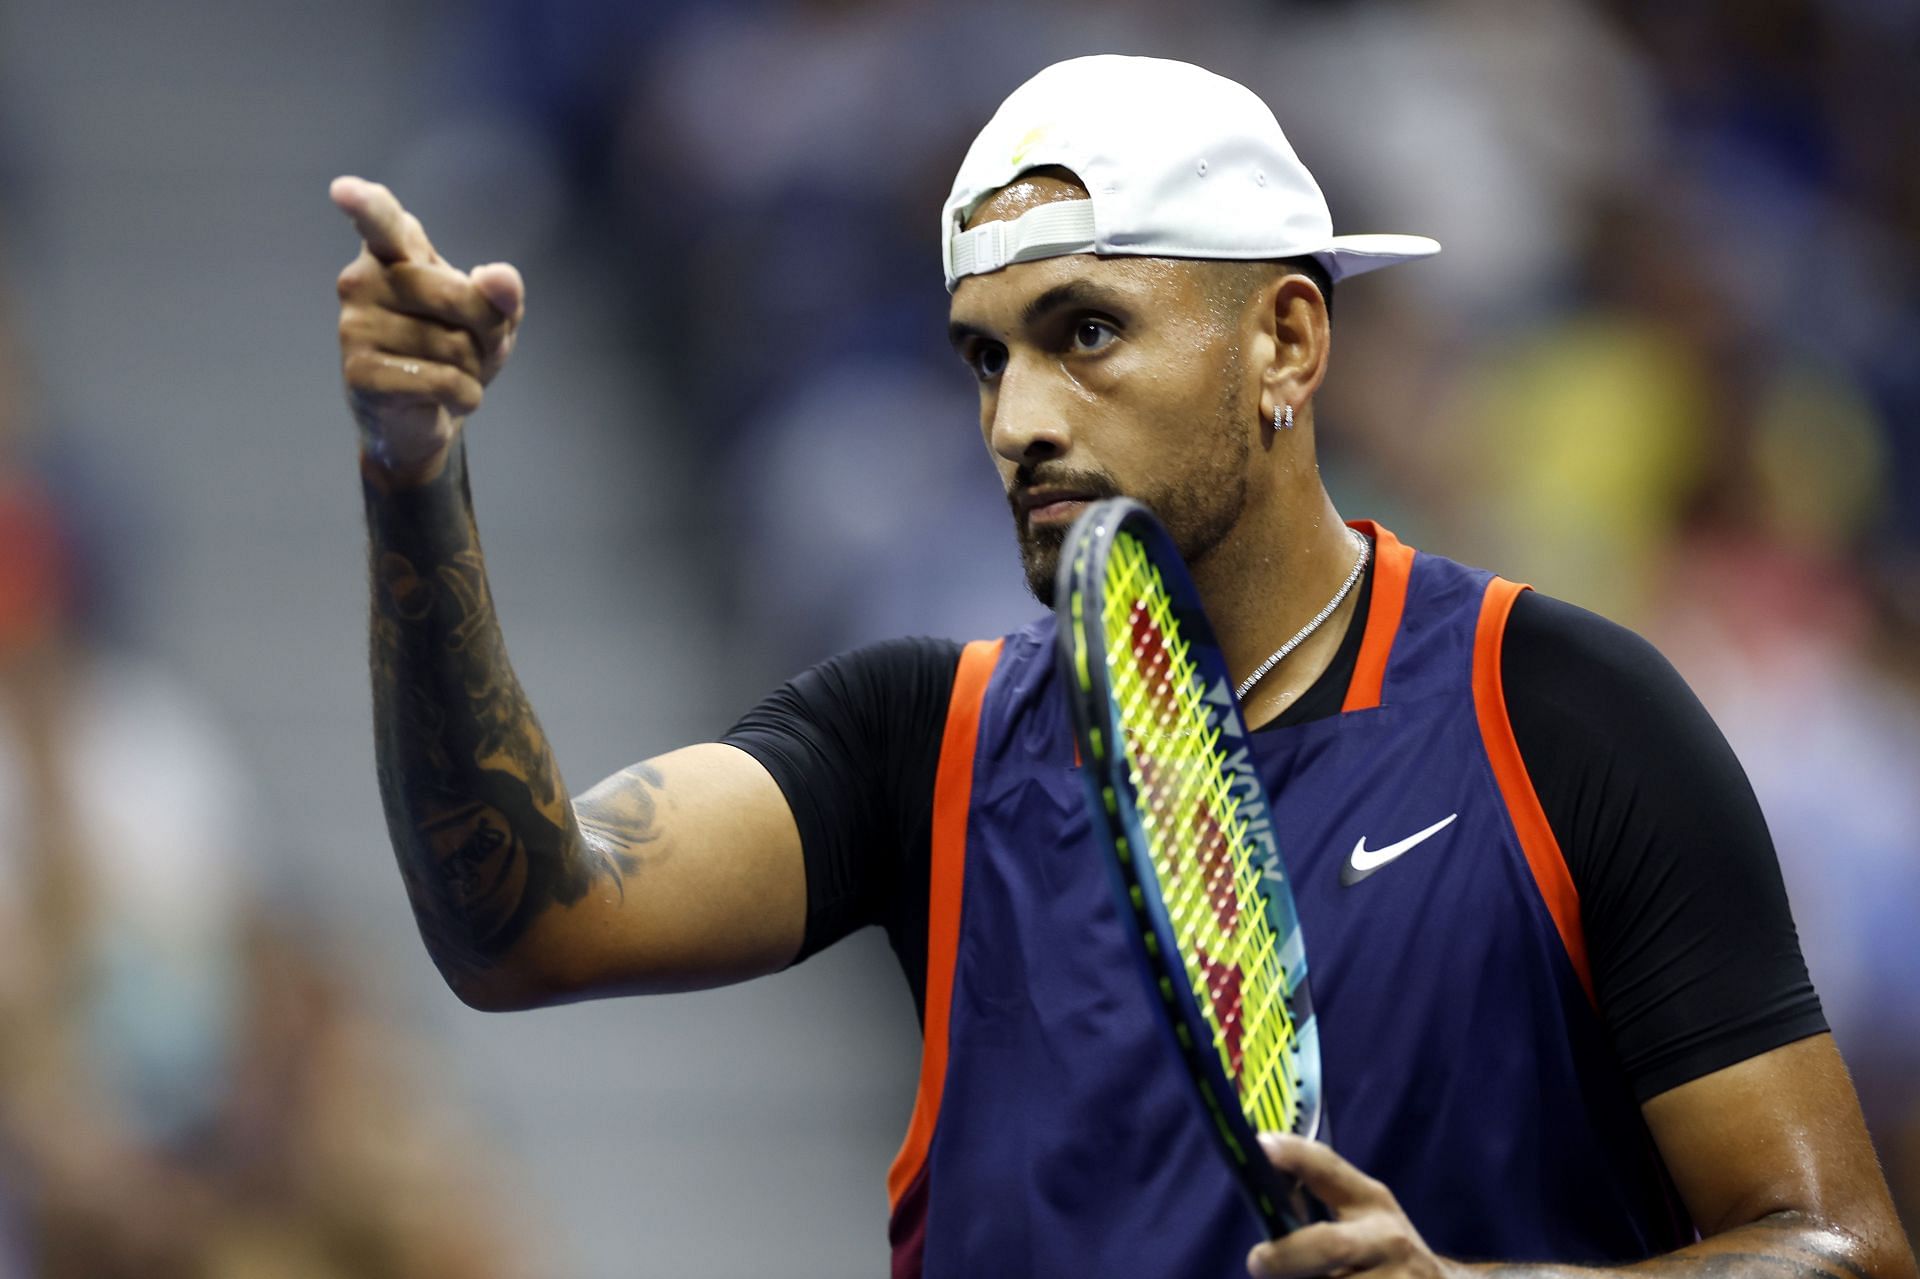 Nick Kyrgios reacts to anonymous ATP player's claim that 'half of Top 100 players or maybe more' take stimulant drug